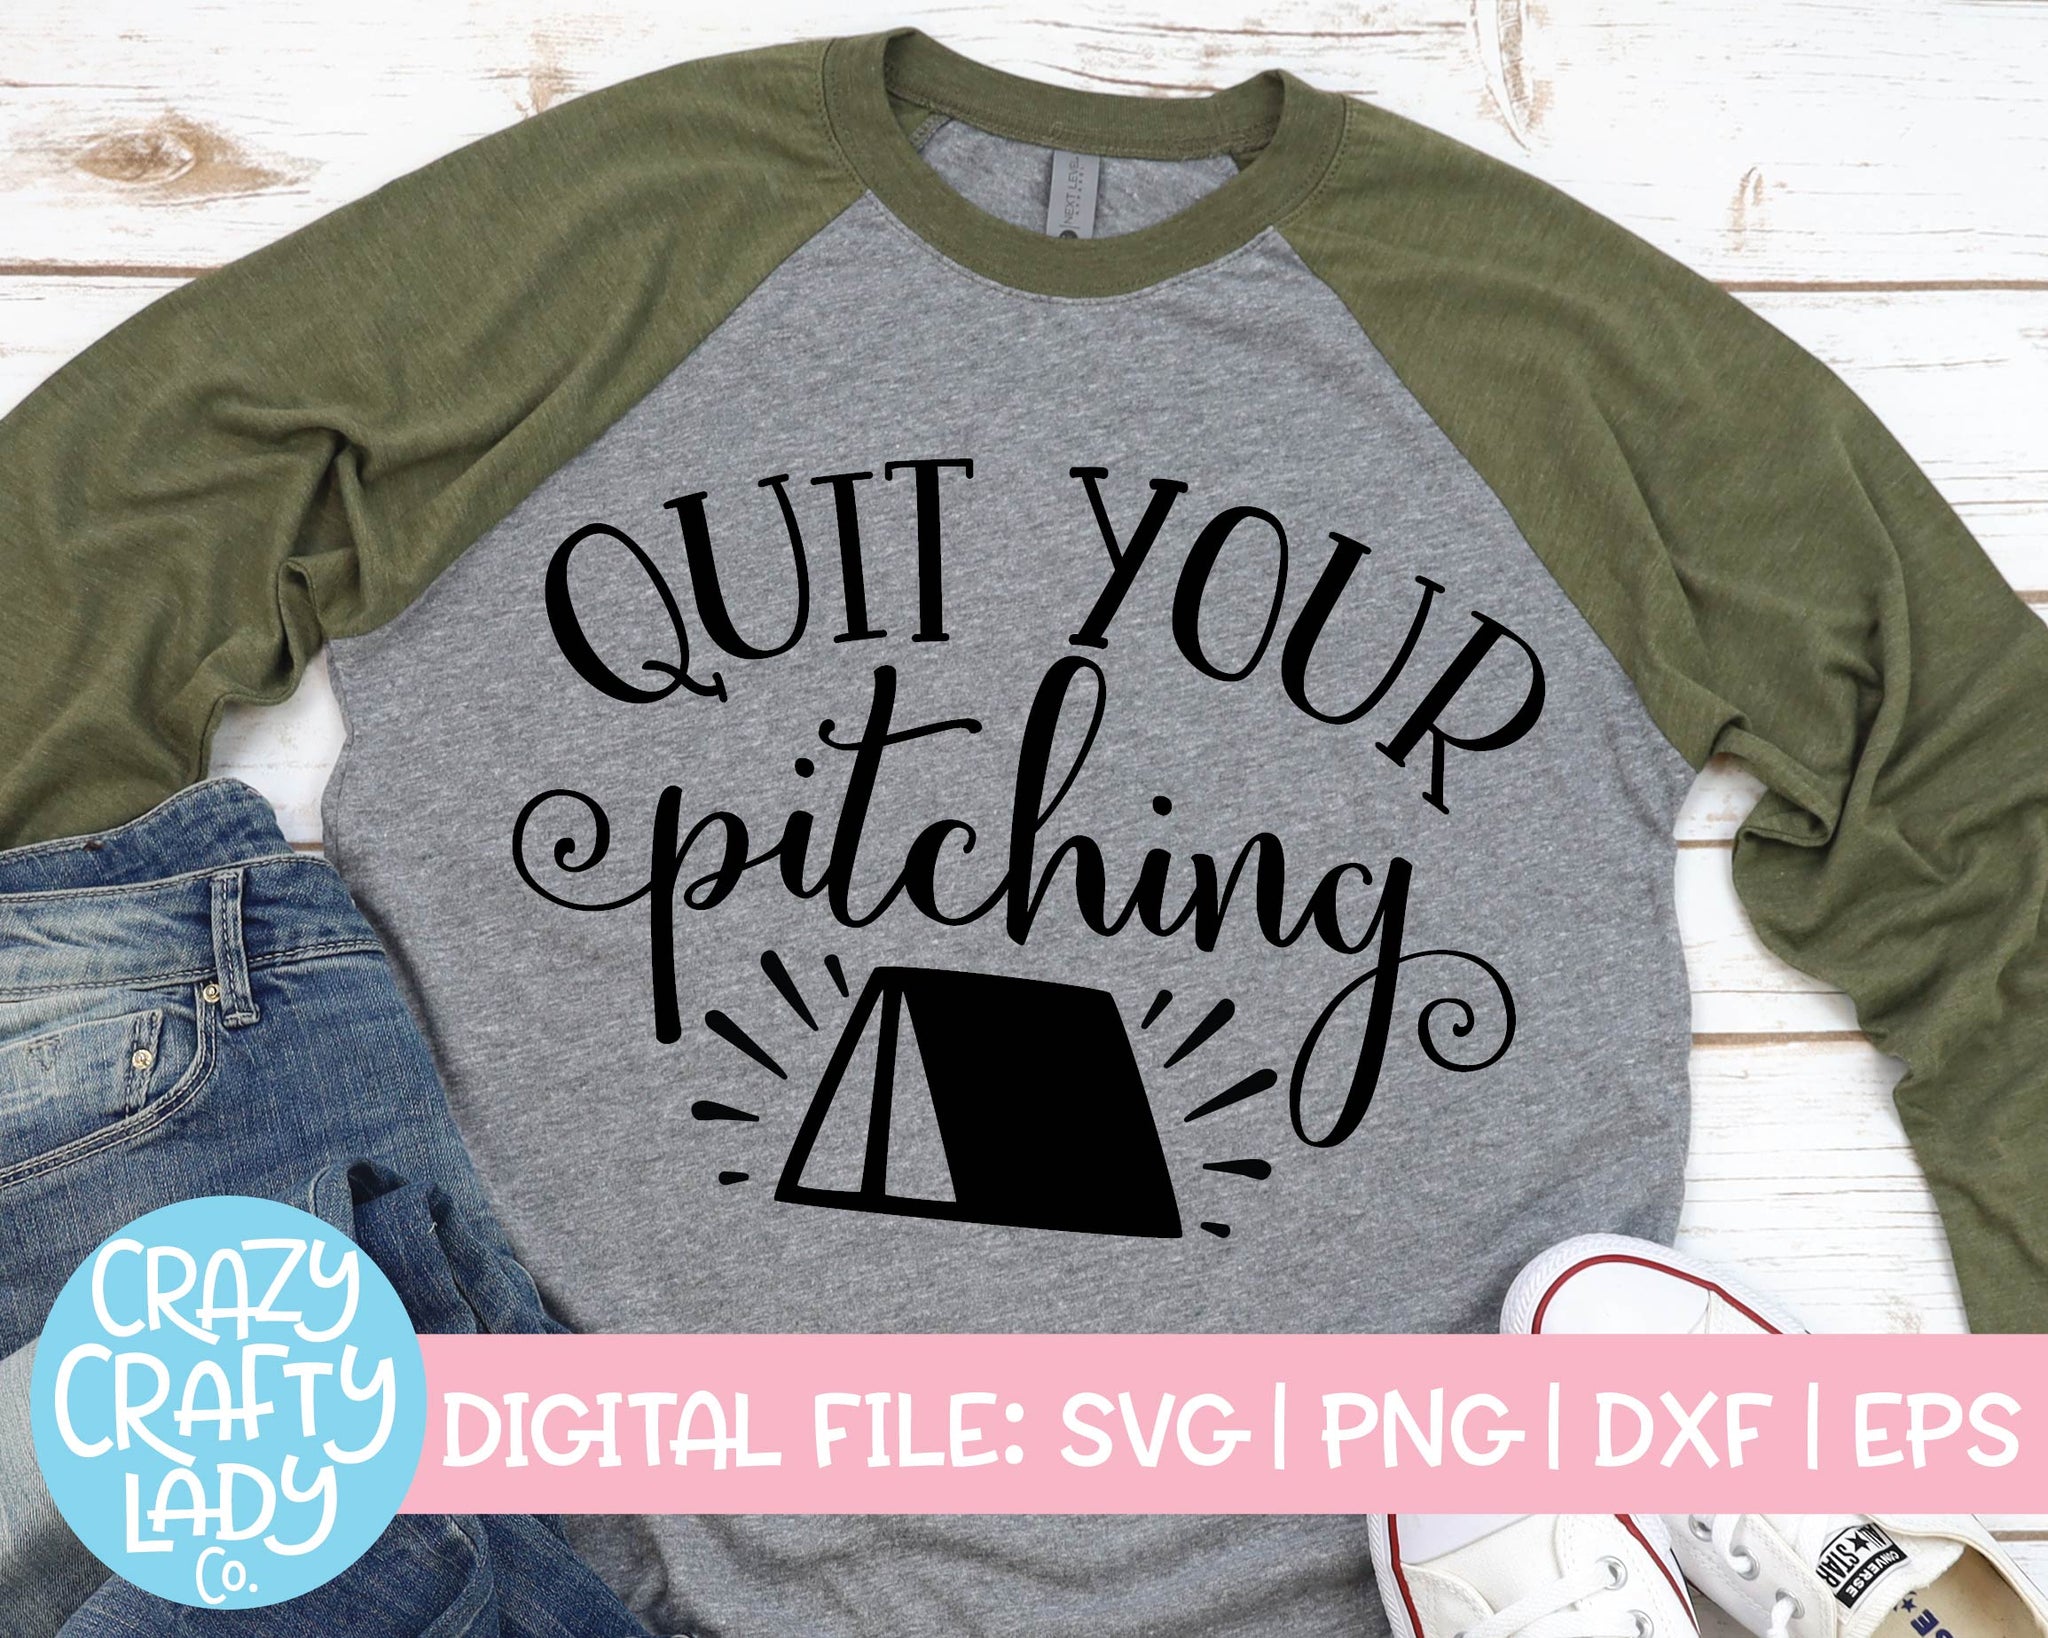 Download Tent Camping SVG Cut File Bundle - Crazy Crafty Lady Co.